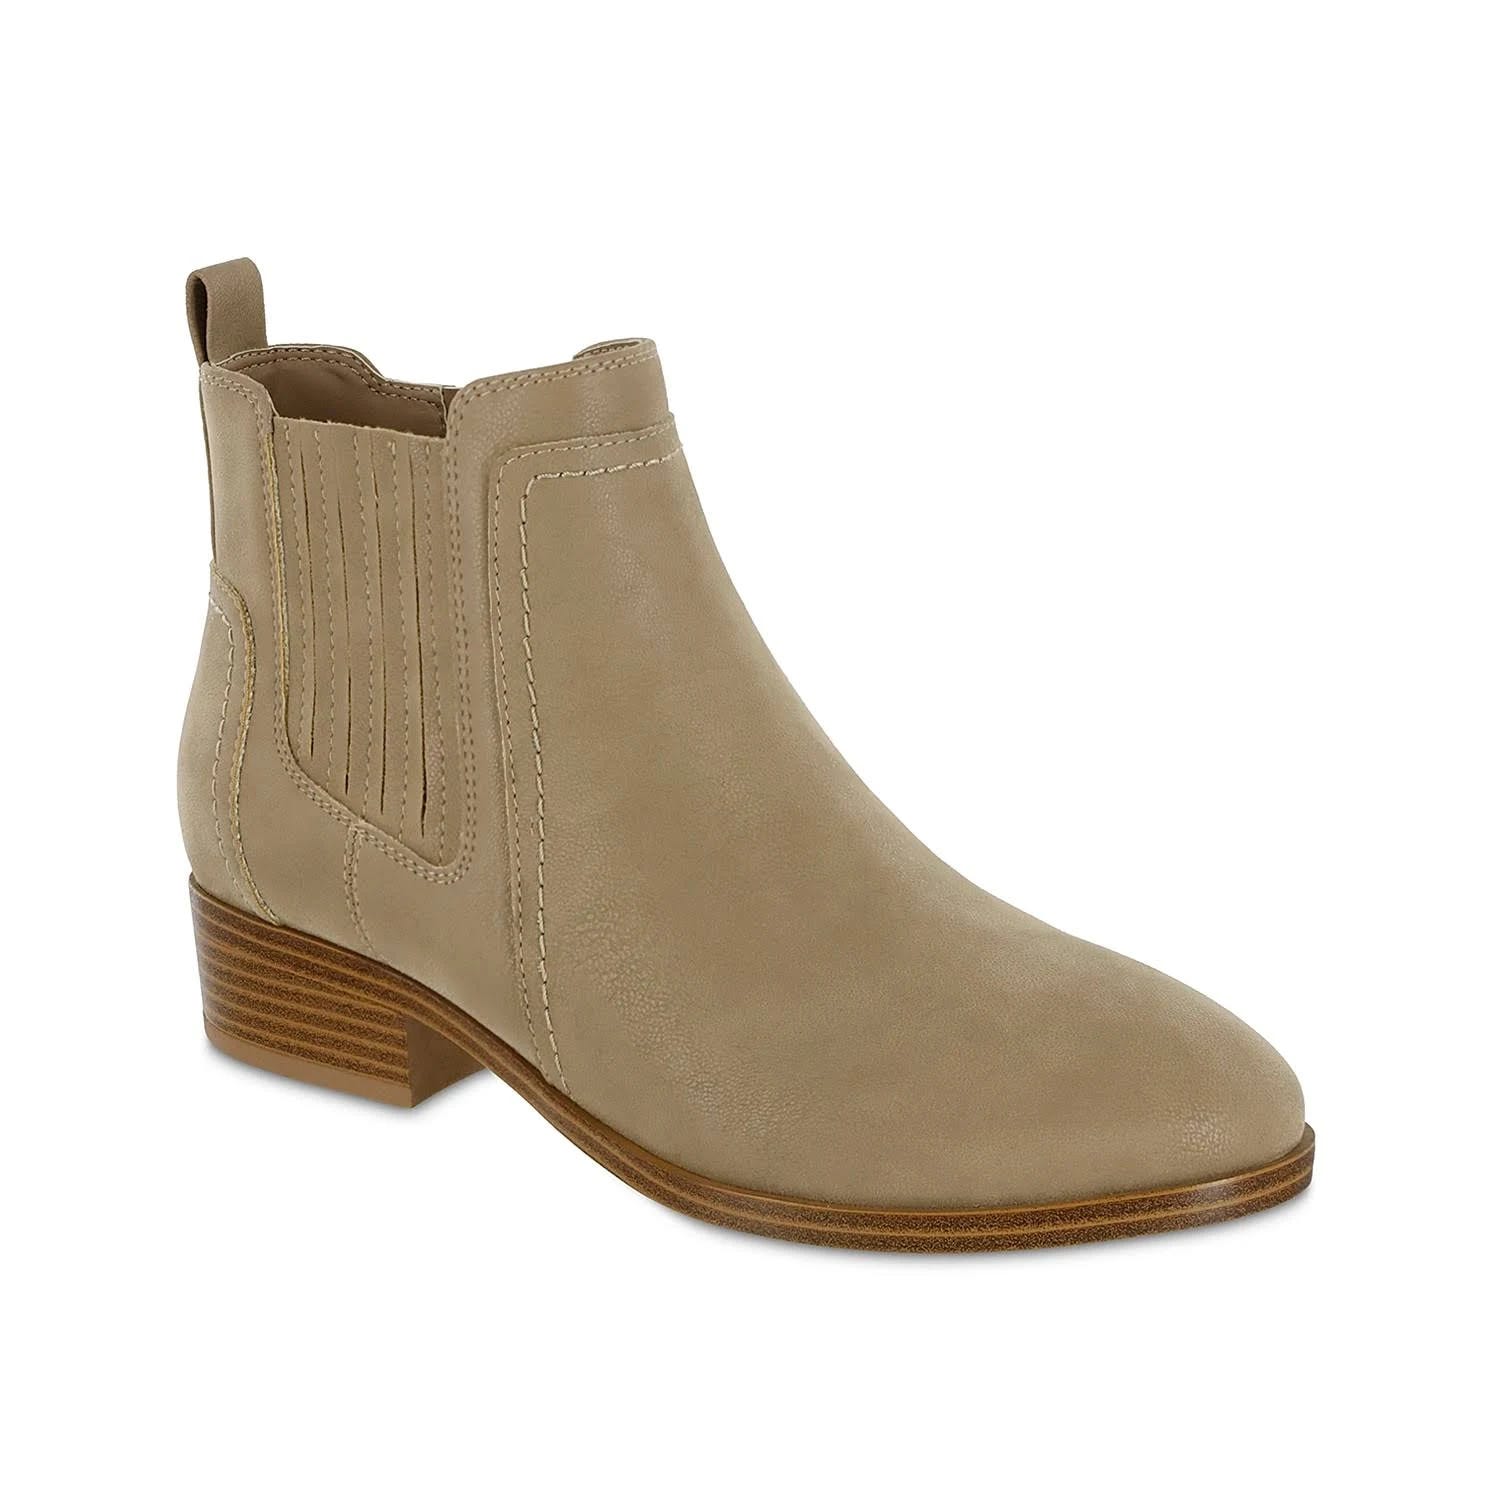 Stylish Mia Belle Bootie for Women - Available in Wide Sizes | Image